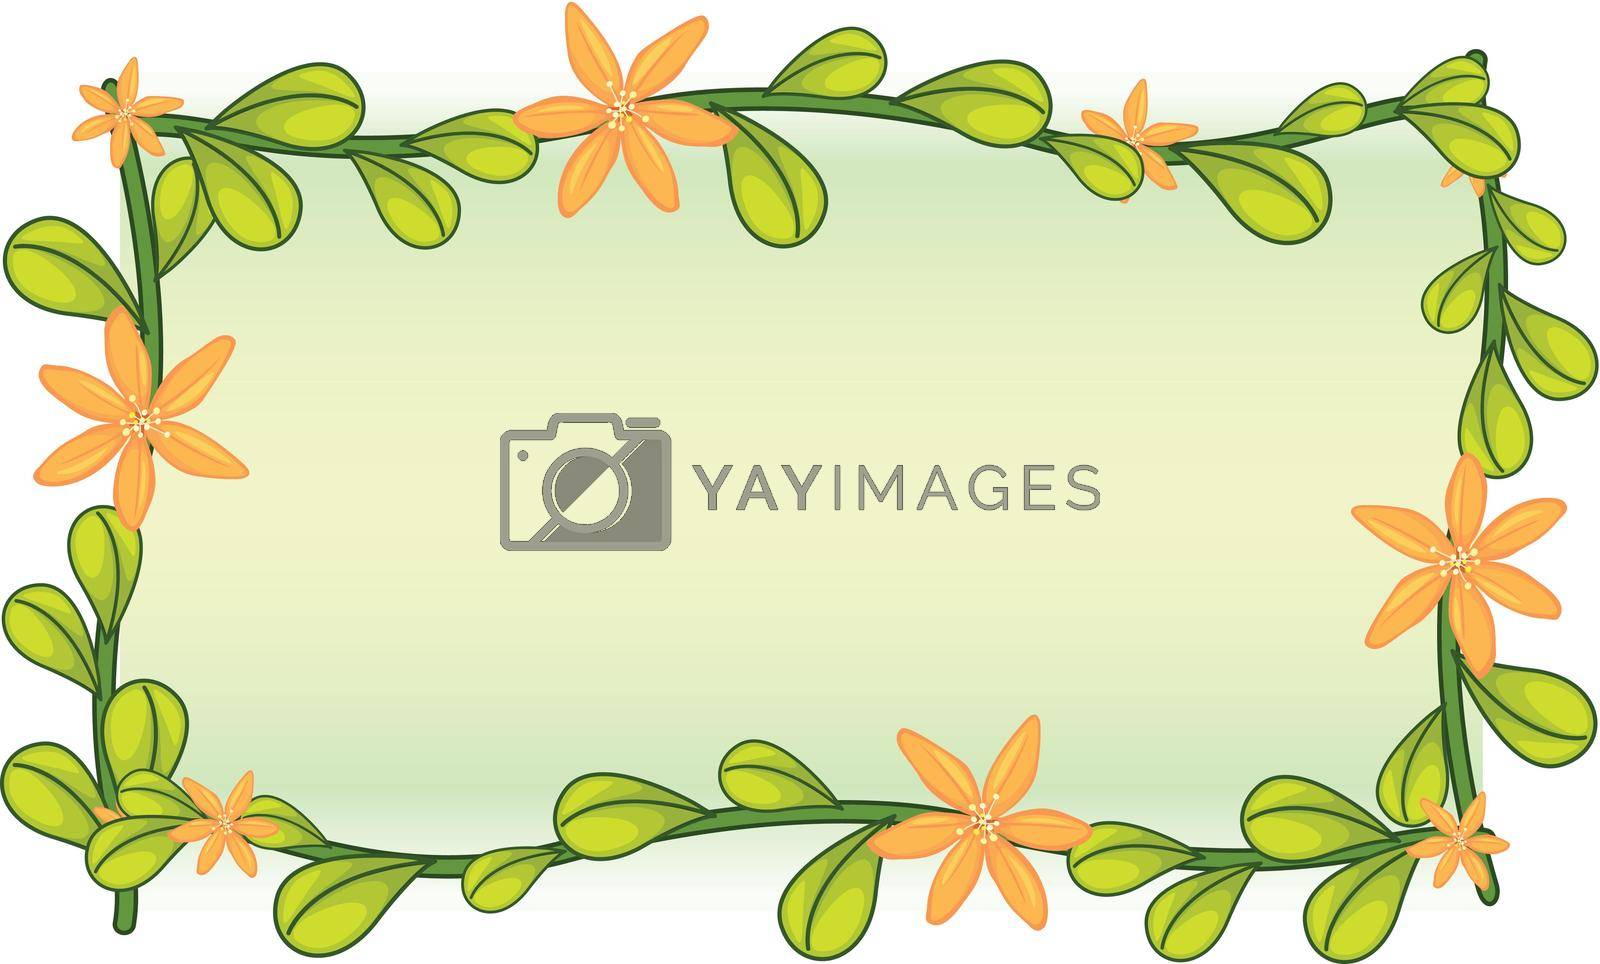 Royalty free image of Leafy by iimages